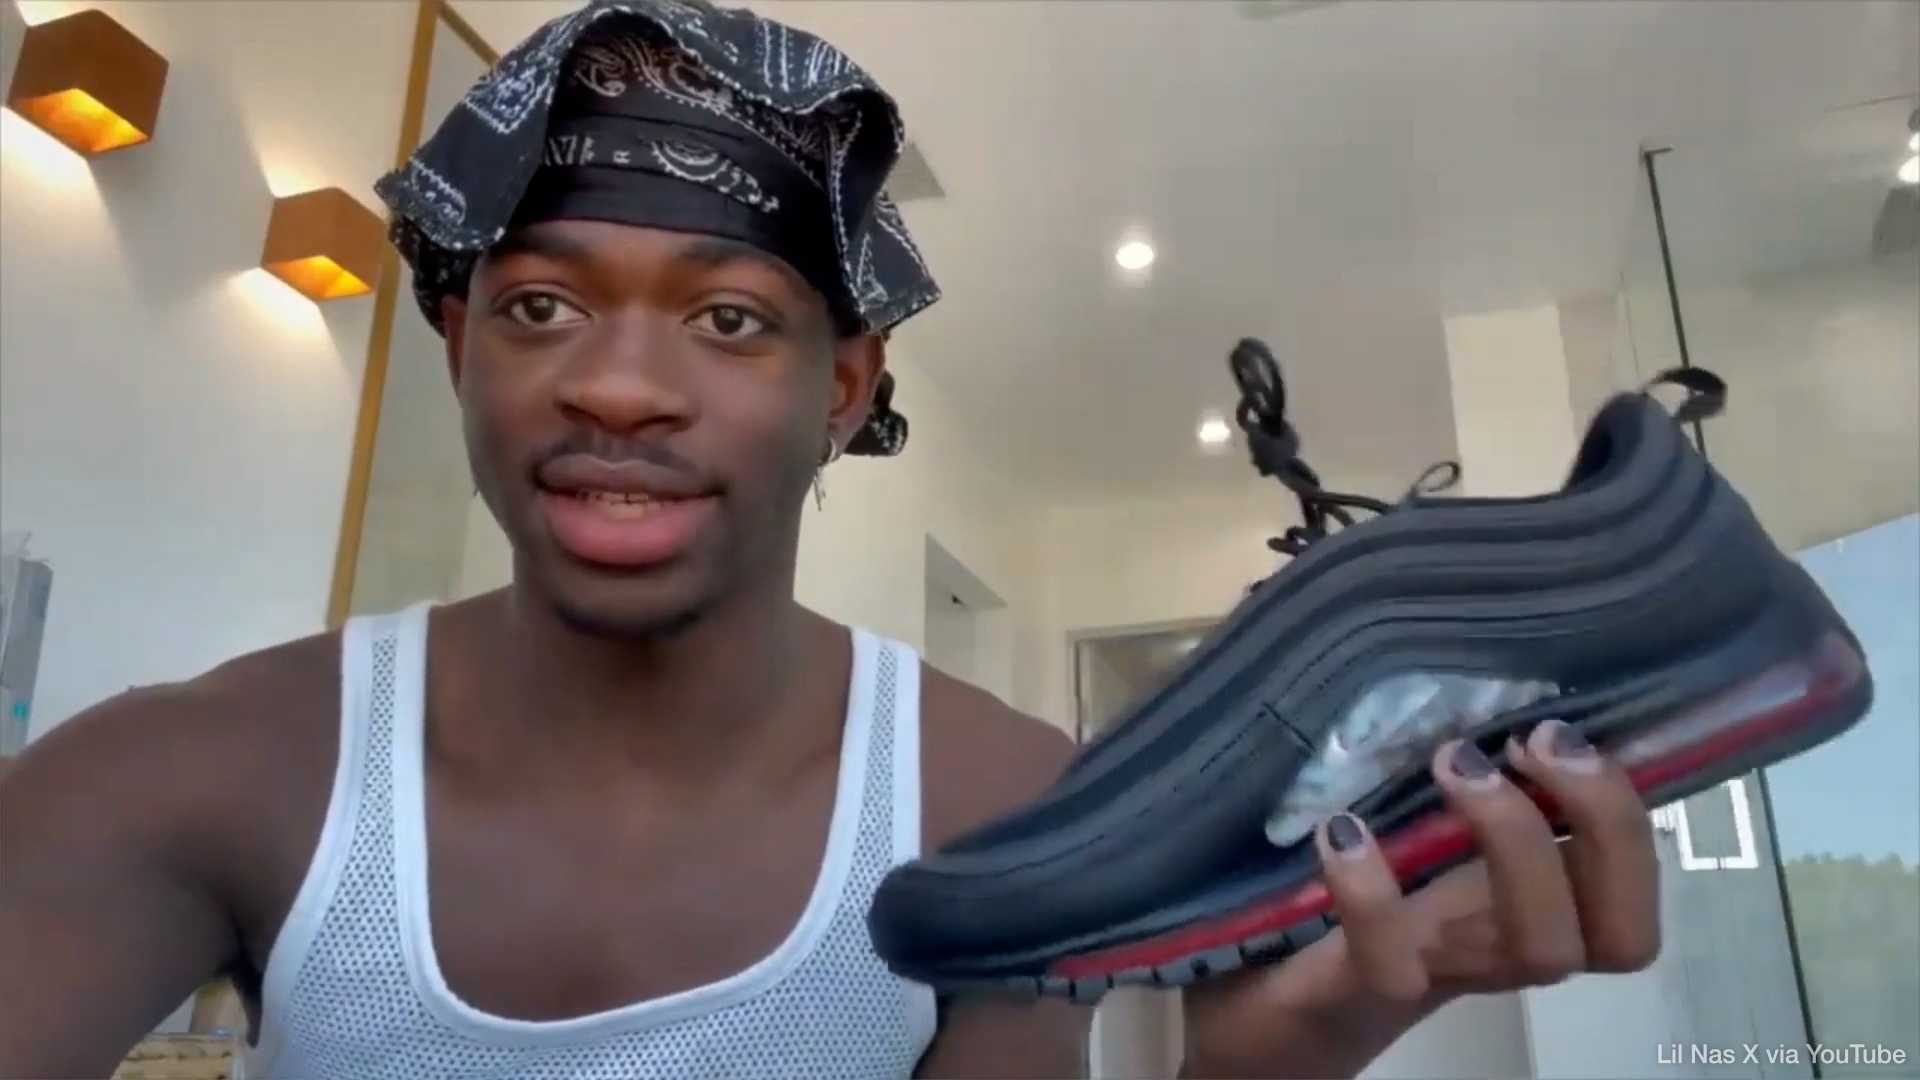 Judge blocks customers from receiving controversial Lil Nas X shoes ...